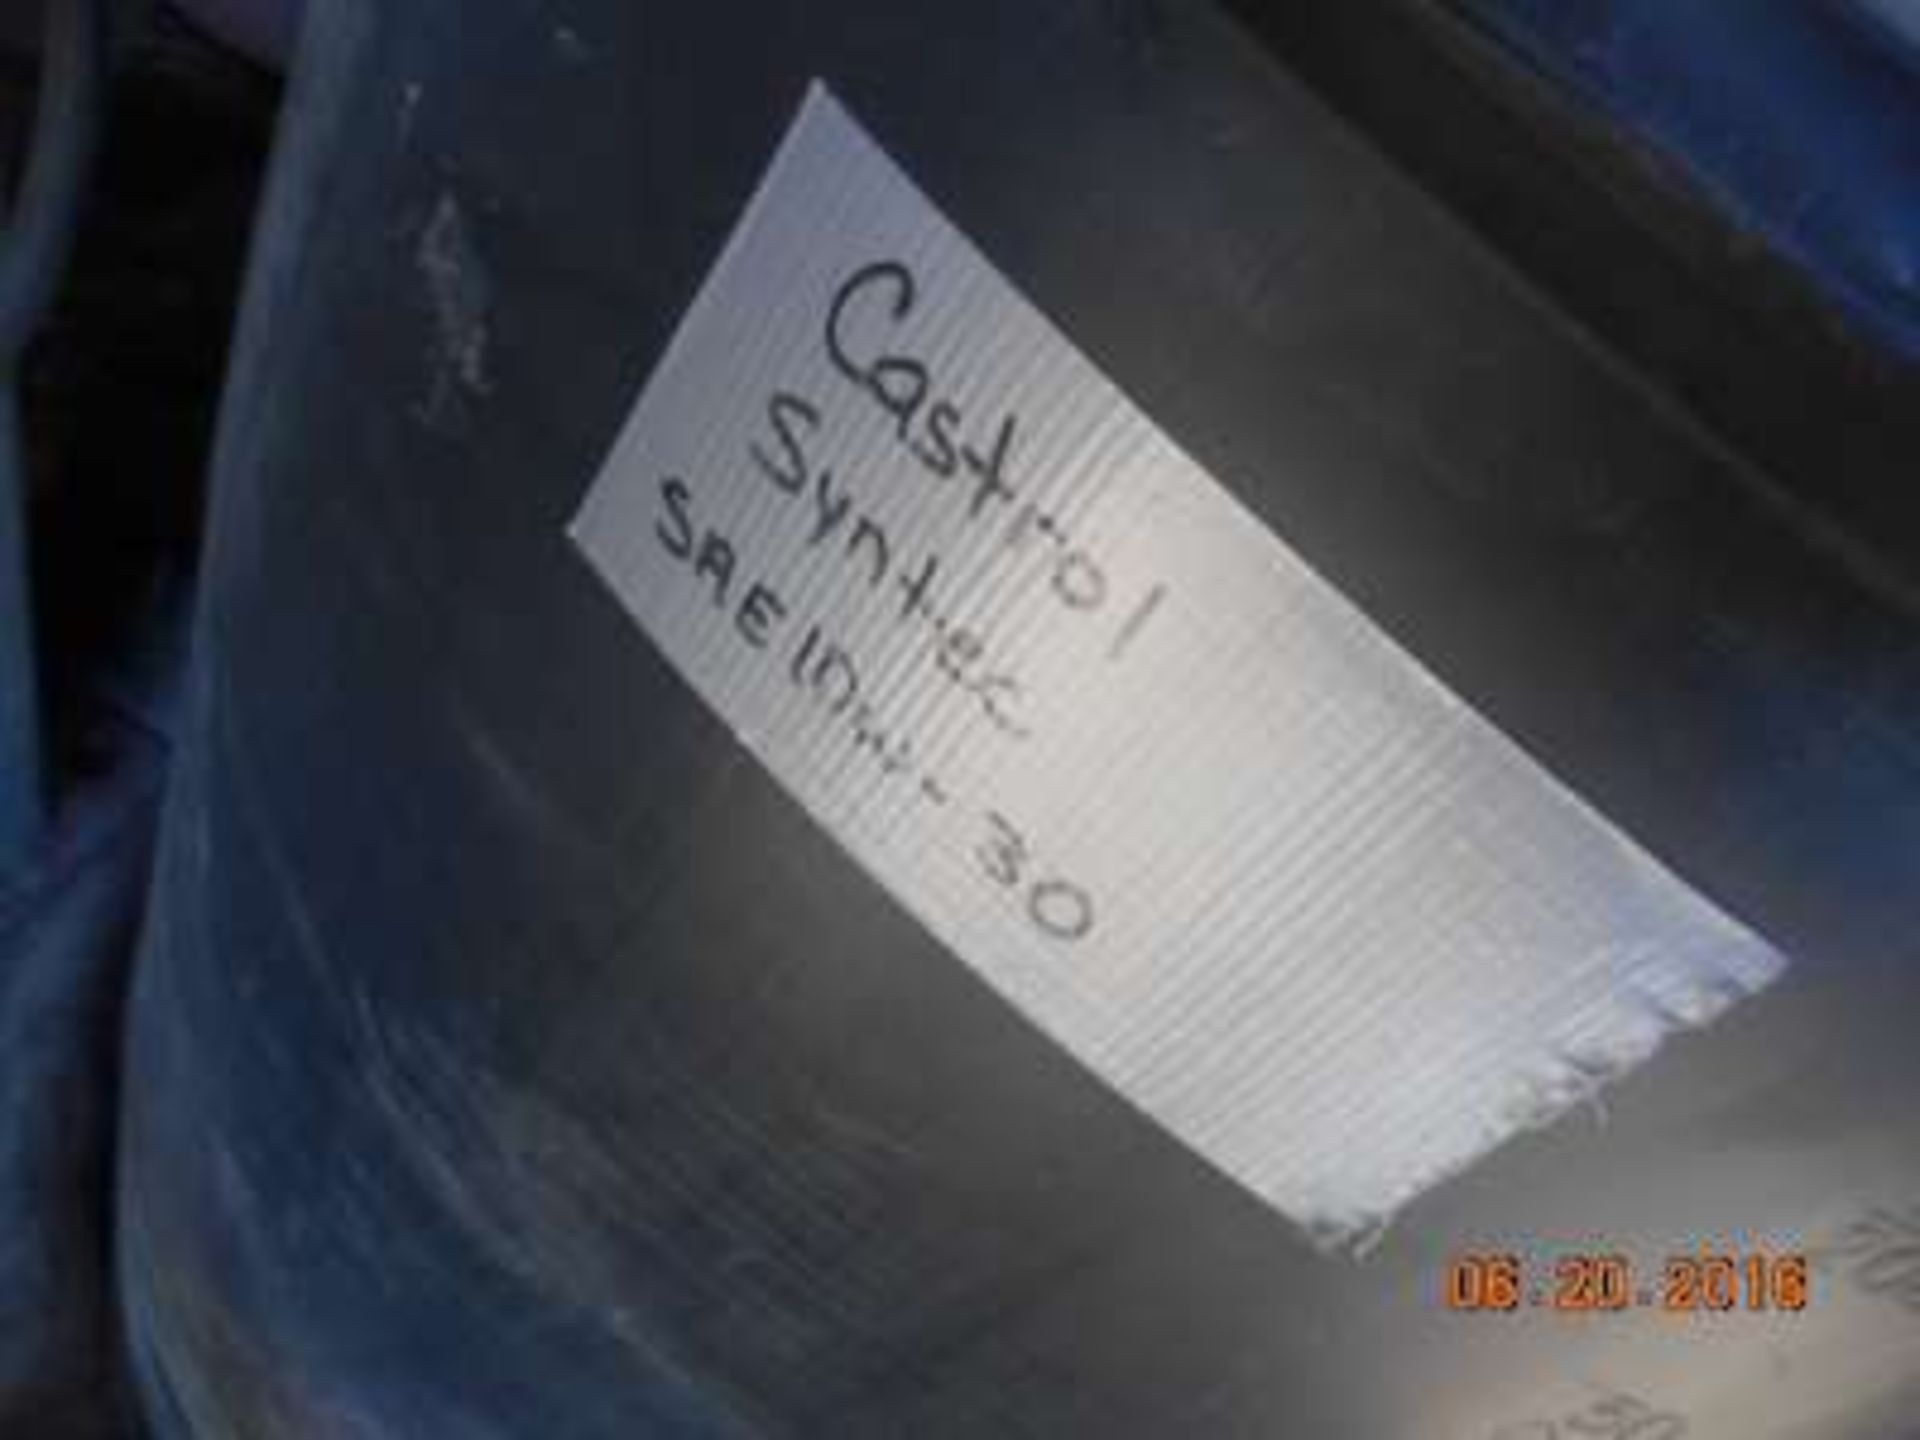 45 gallon drum of 10-30 Full Synthetic Oil